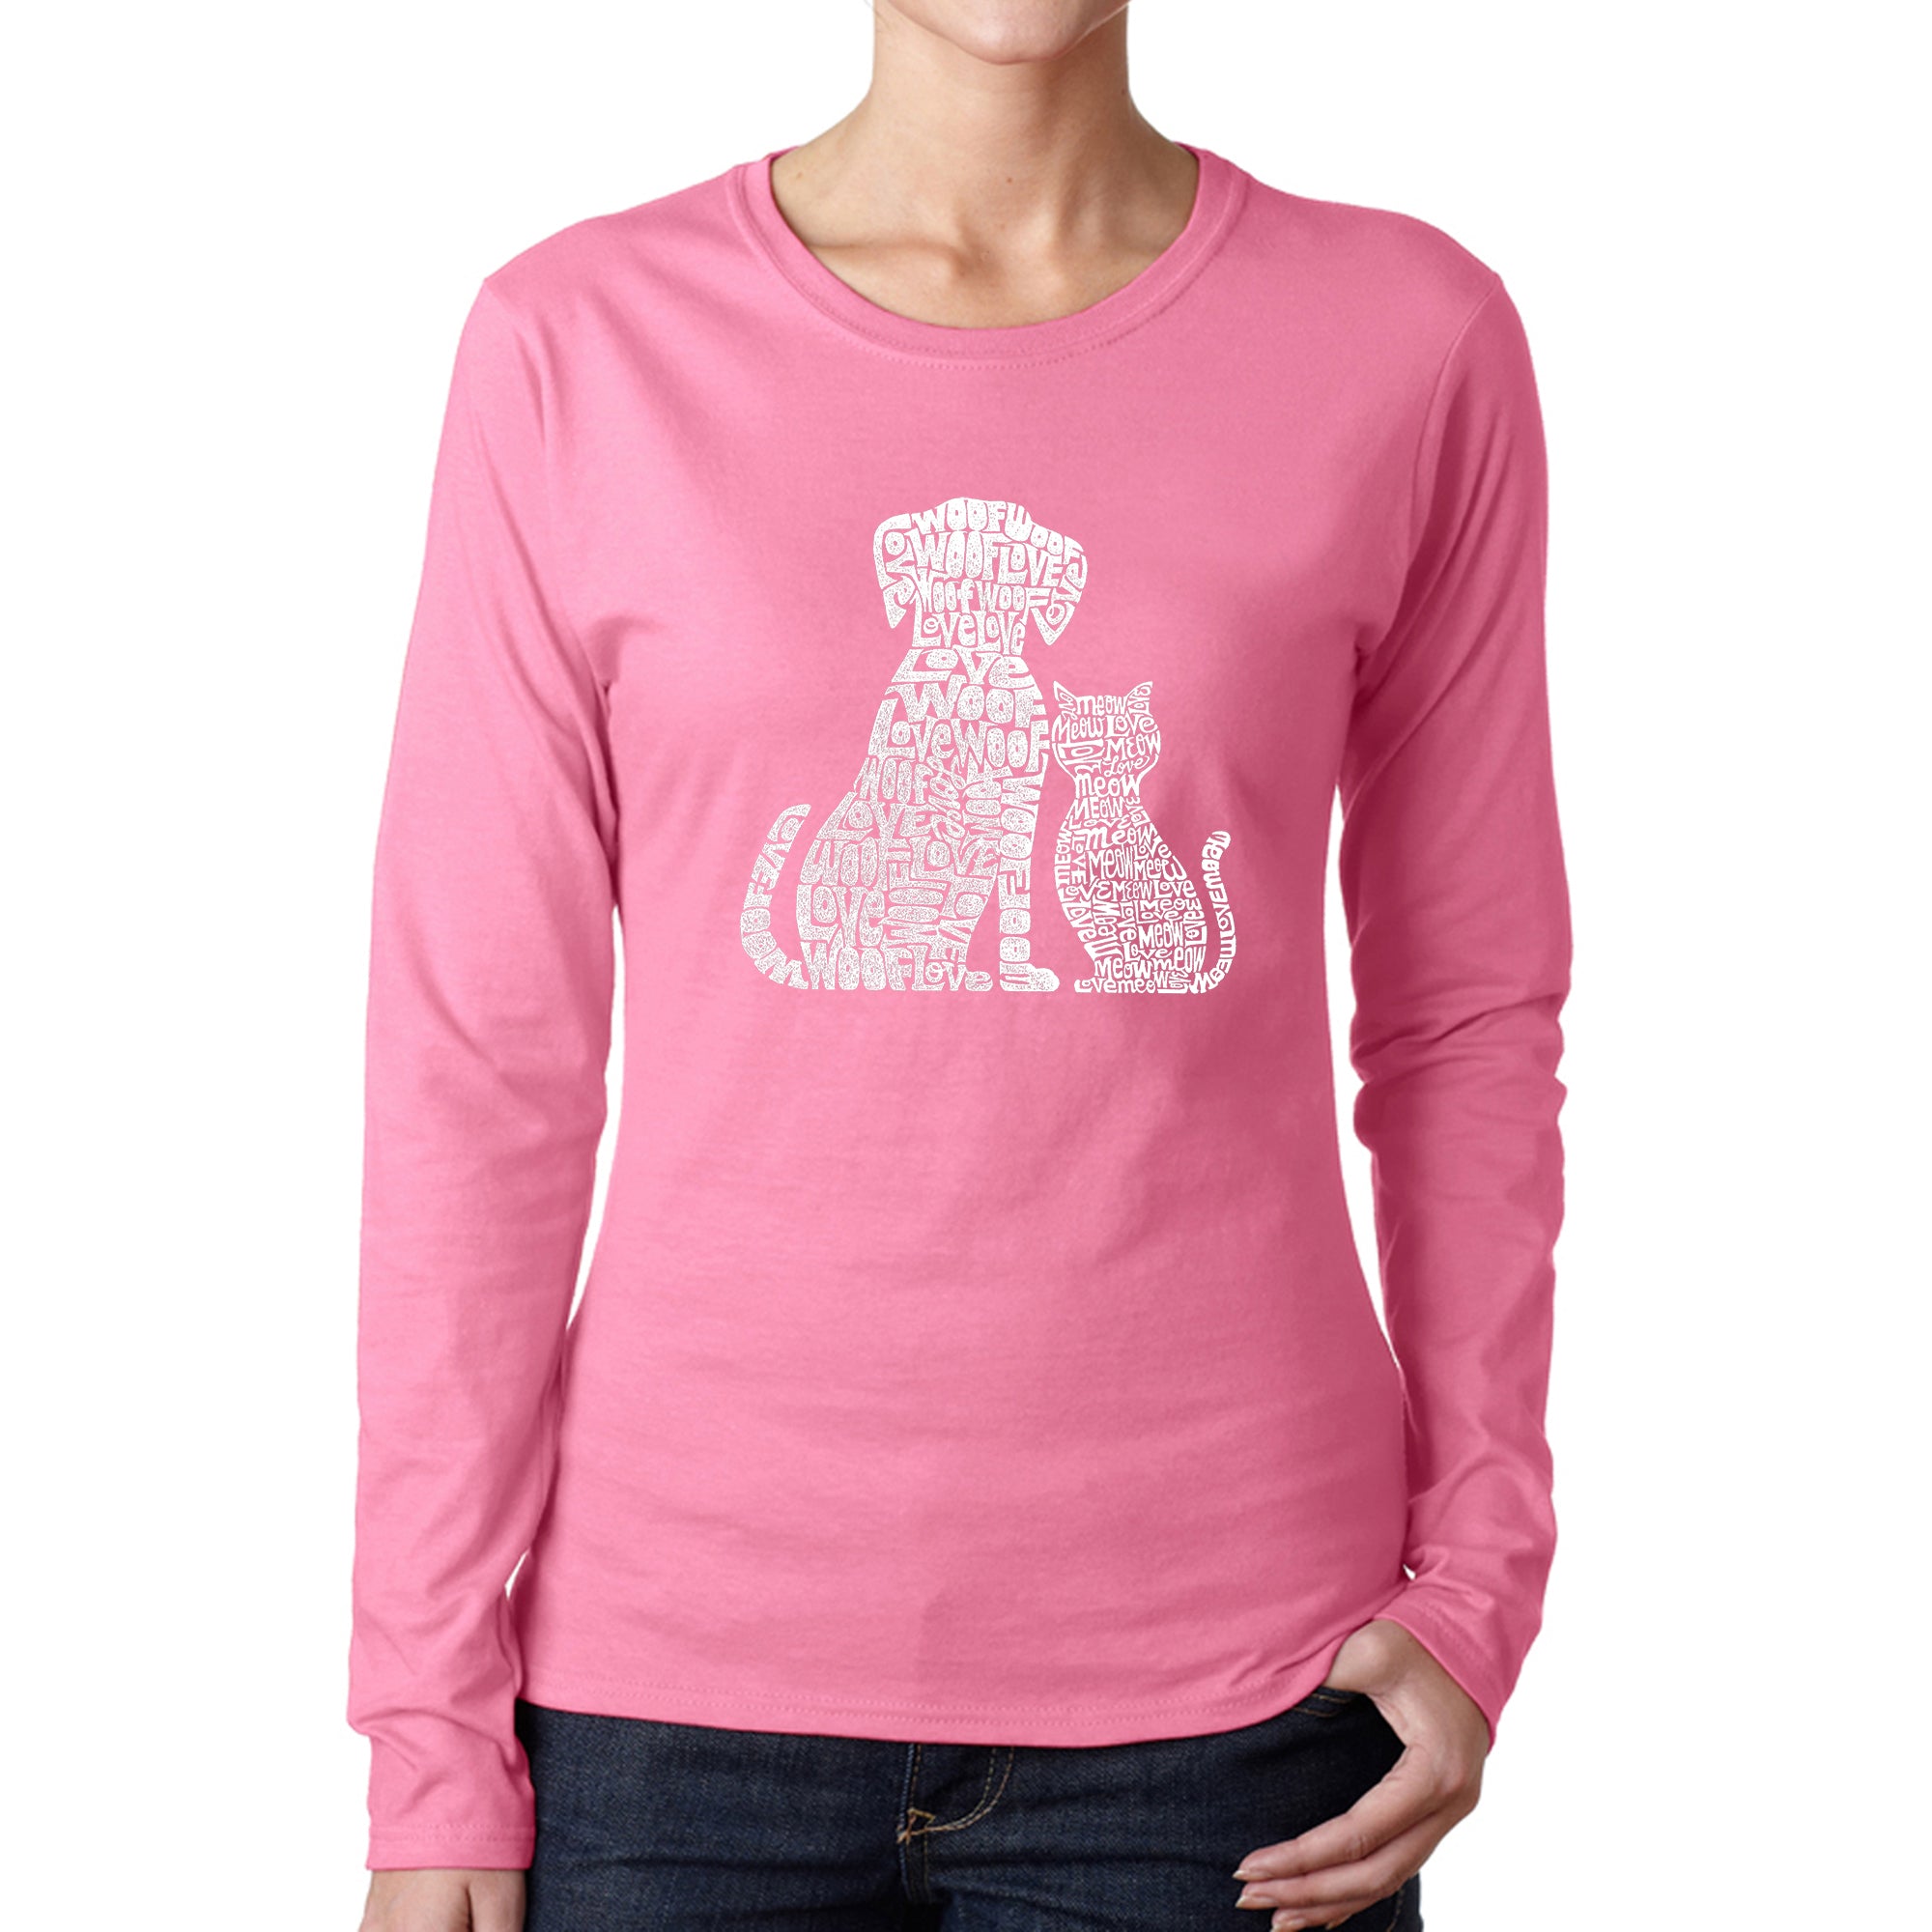 Dogs And Cats - Women's Word Art Long Sleeve T-Shirt - Pink - Large